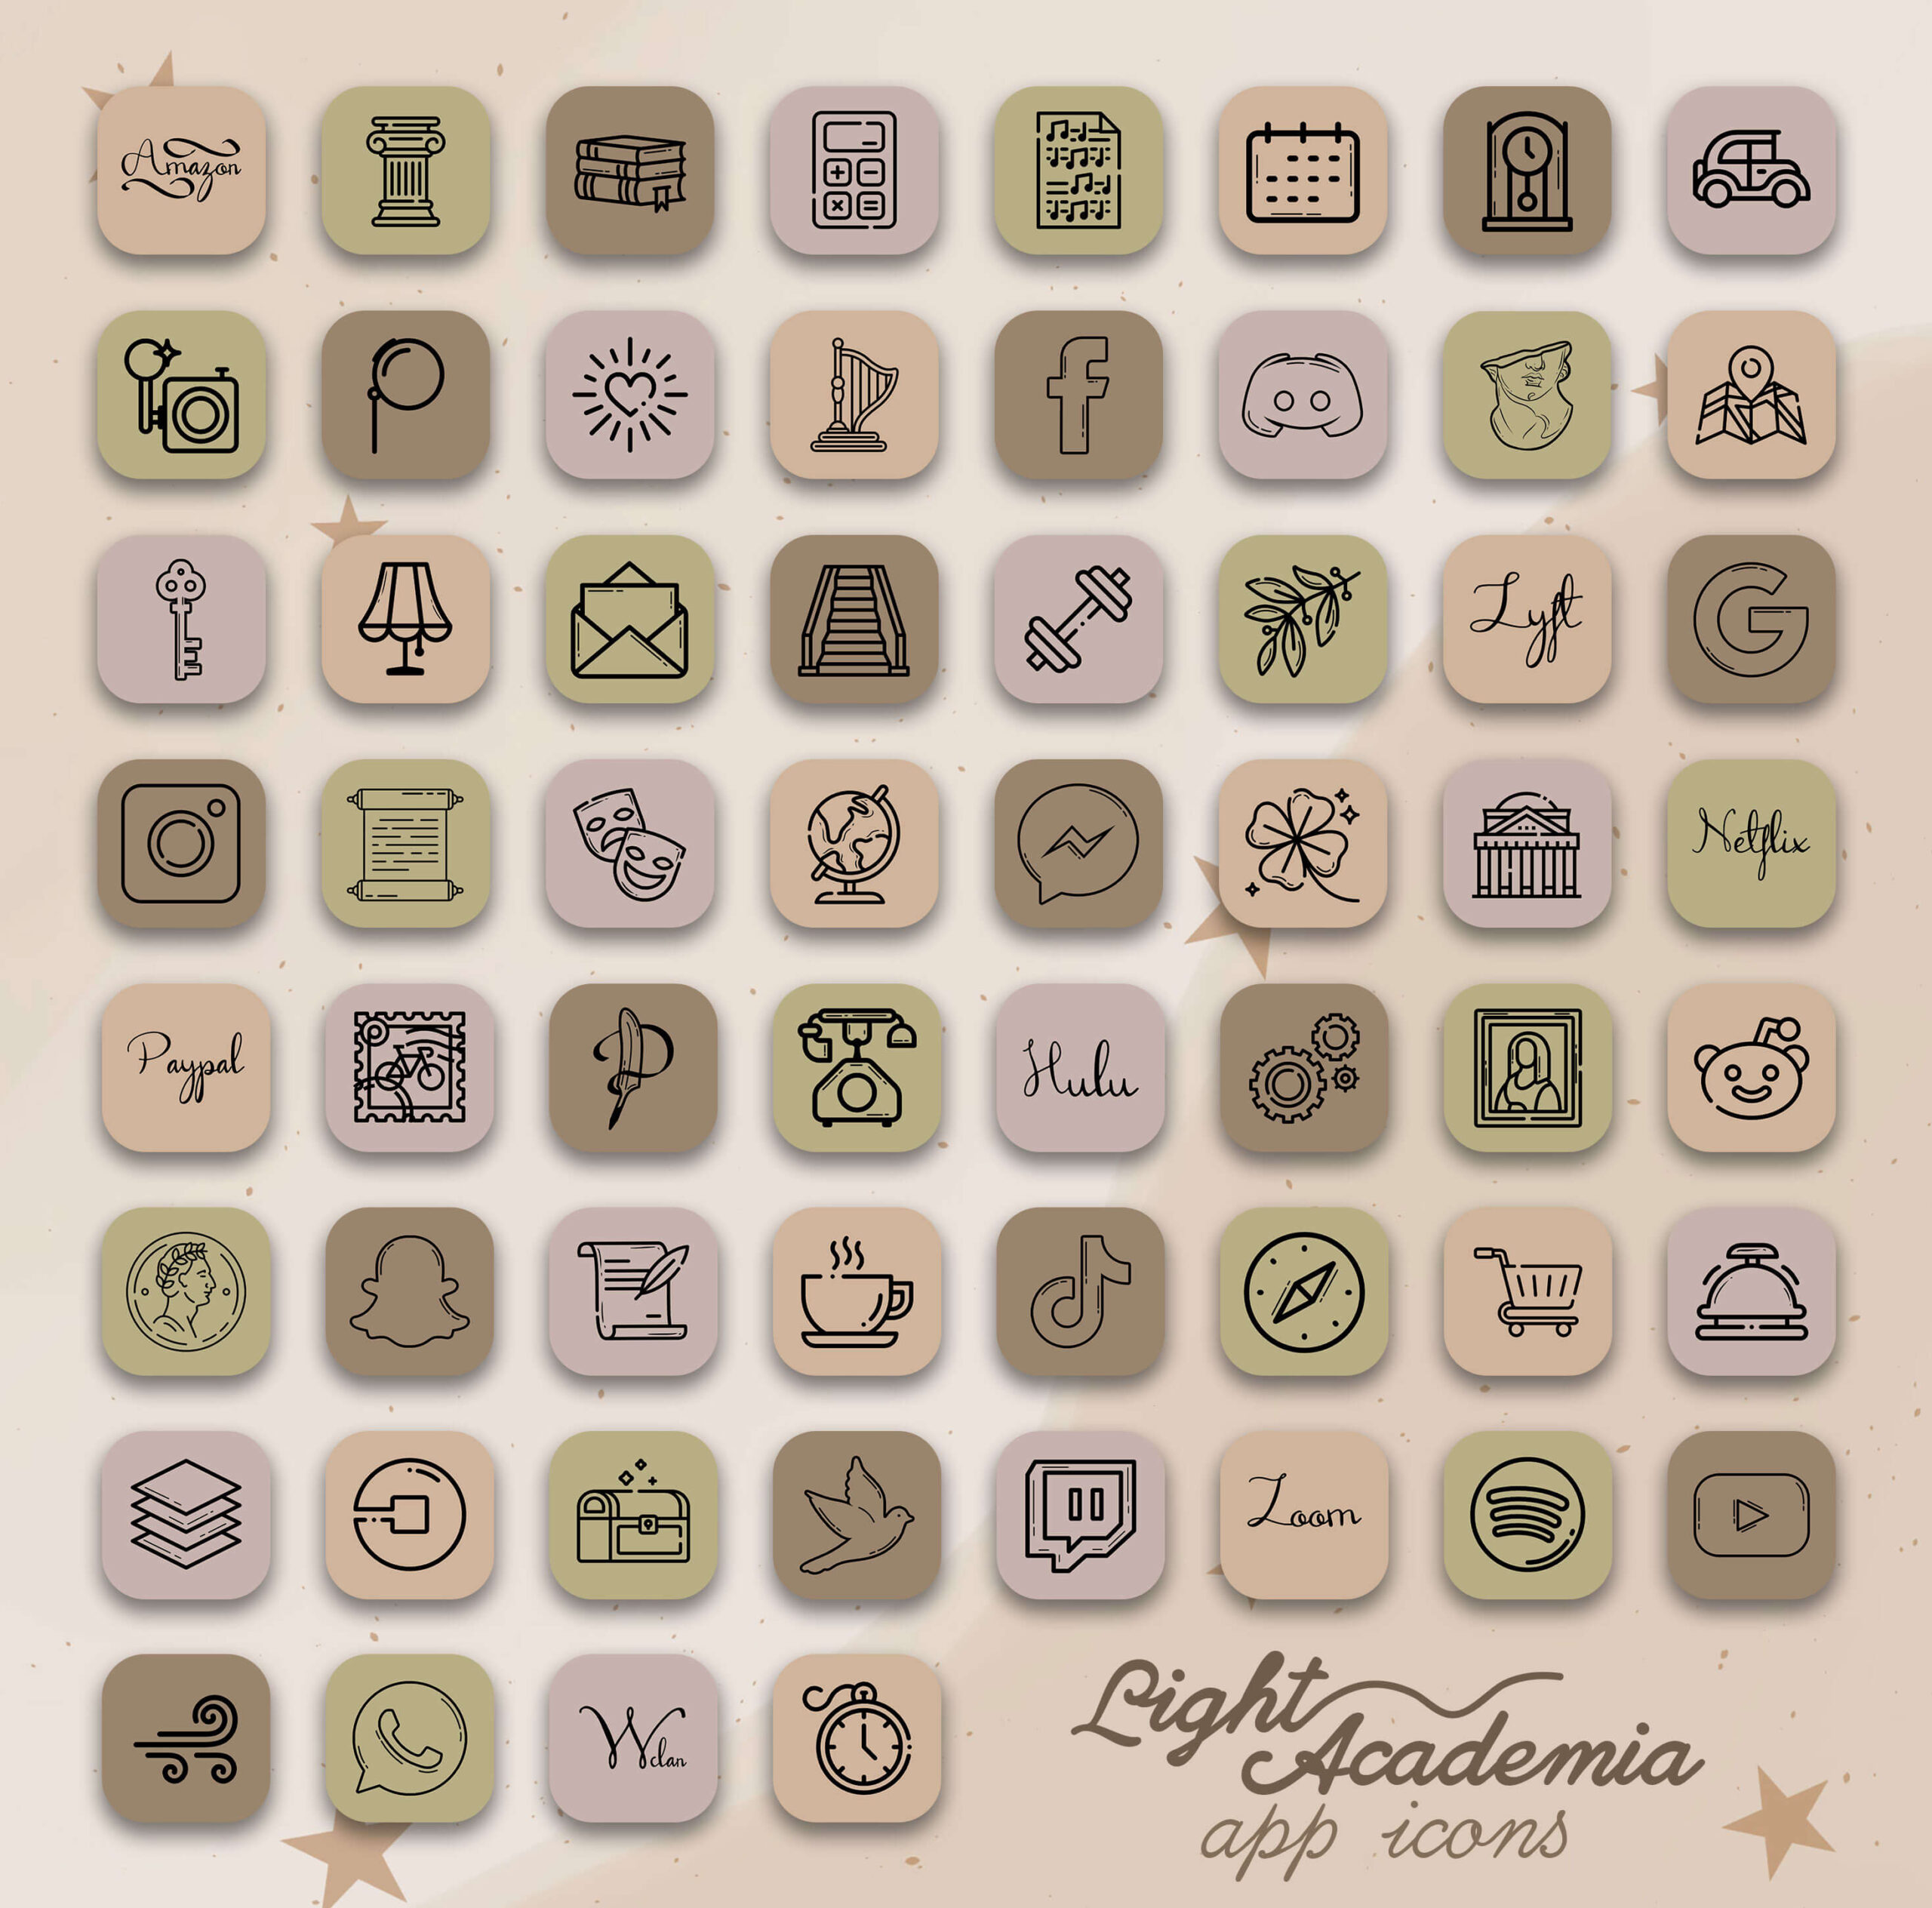 light academia aesthetic app icons pack preview 2